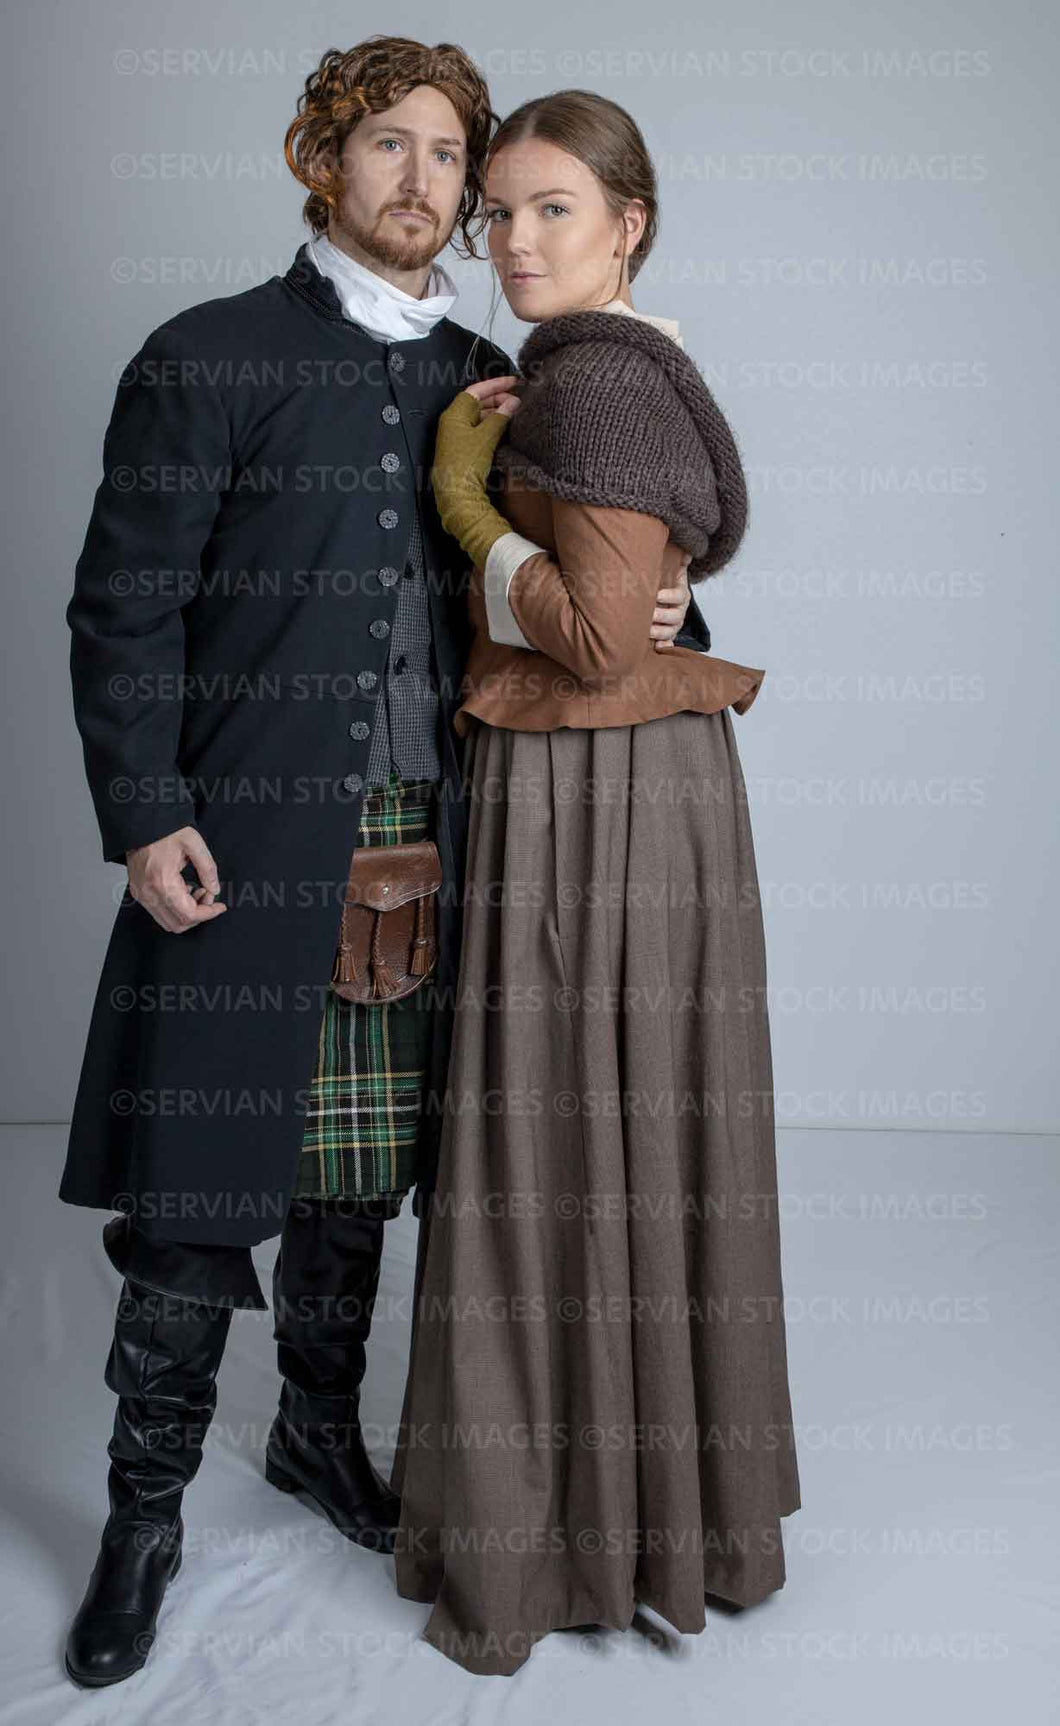 Georgian Scottish couple against a light grey backdrop (Tayla and Aaron 1156)